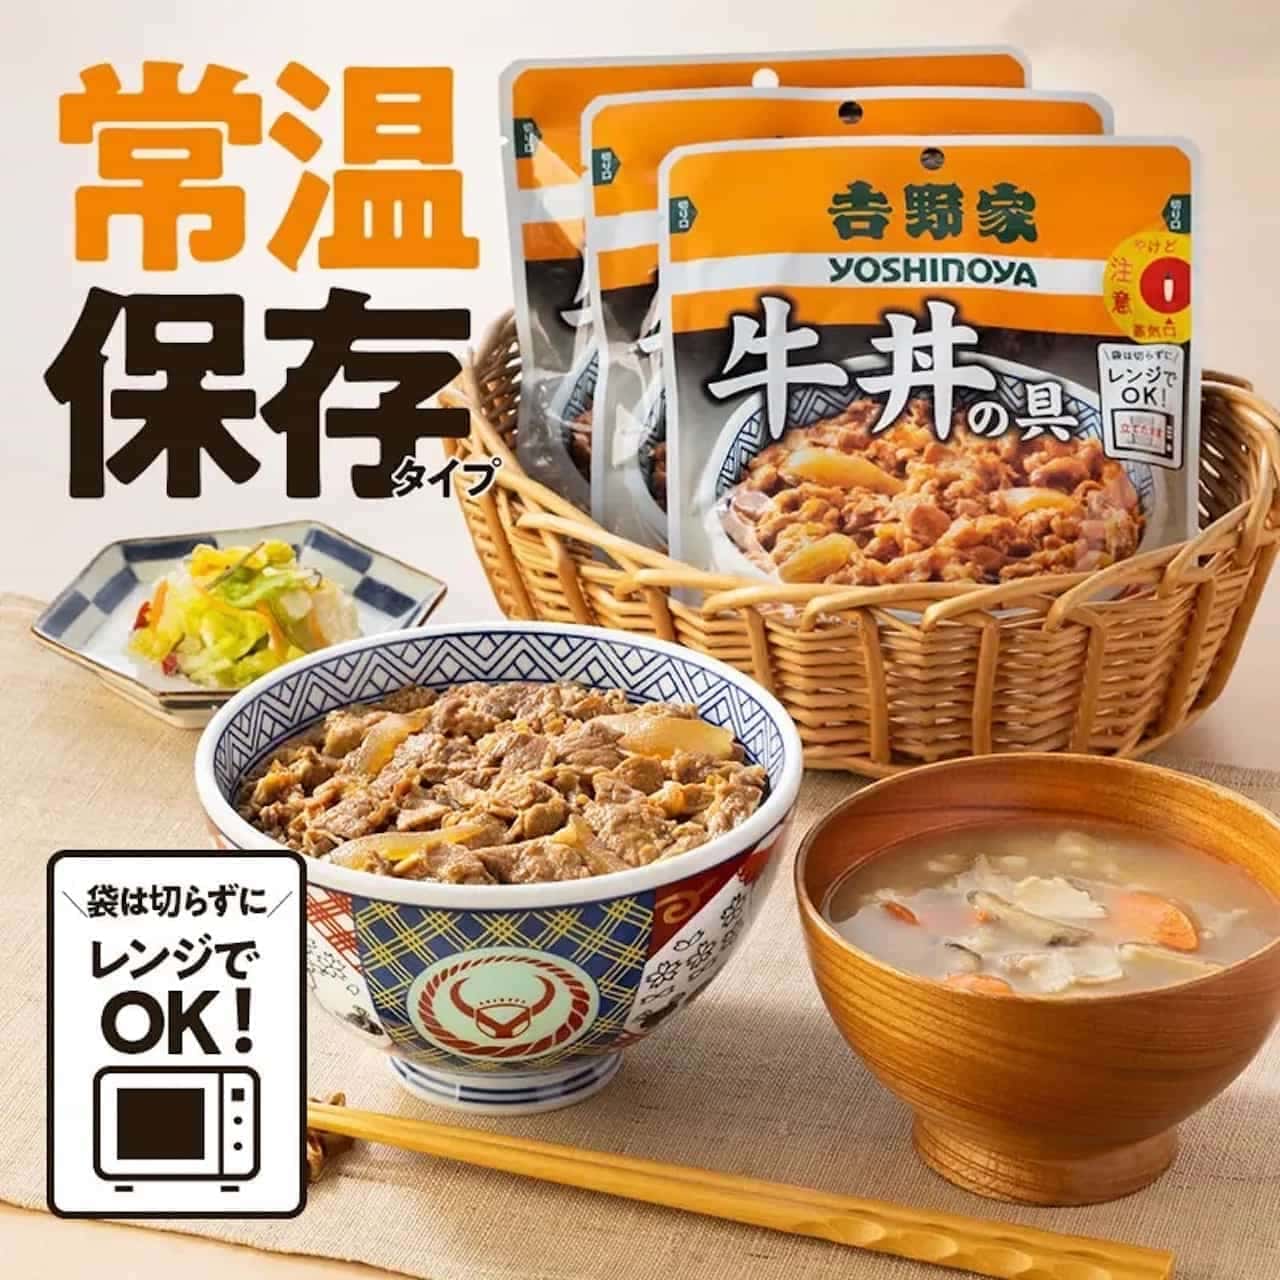 Yoshinoya's "Gyudon no tsuyu (beef bowl) ingredients," which can be stored at room temperature